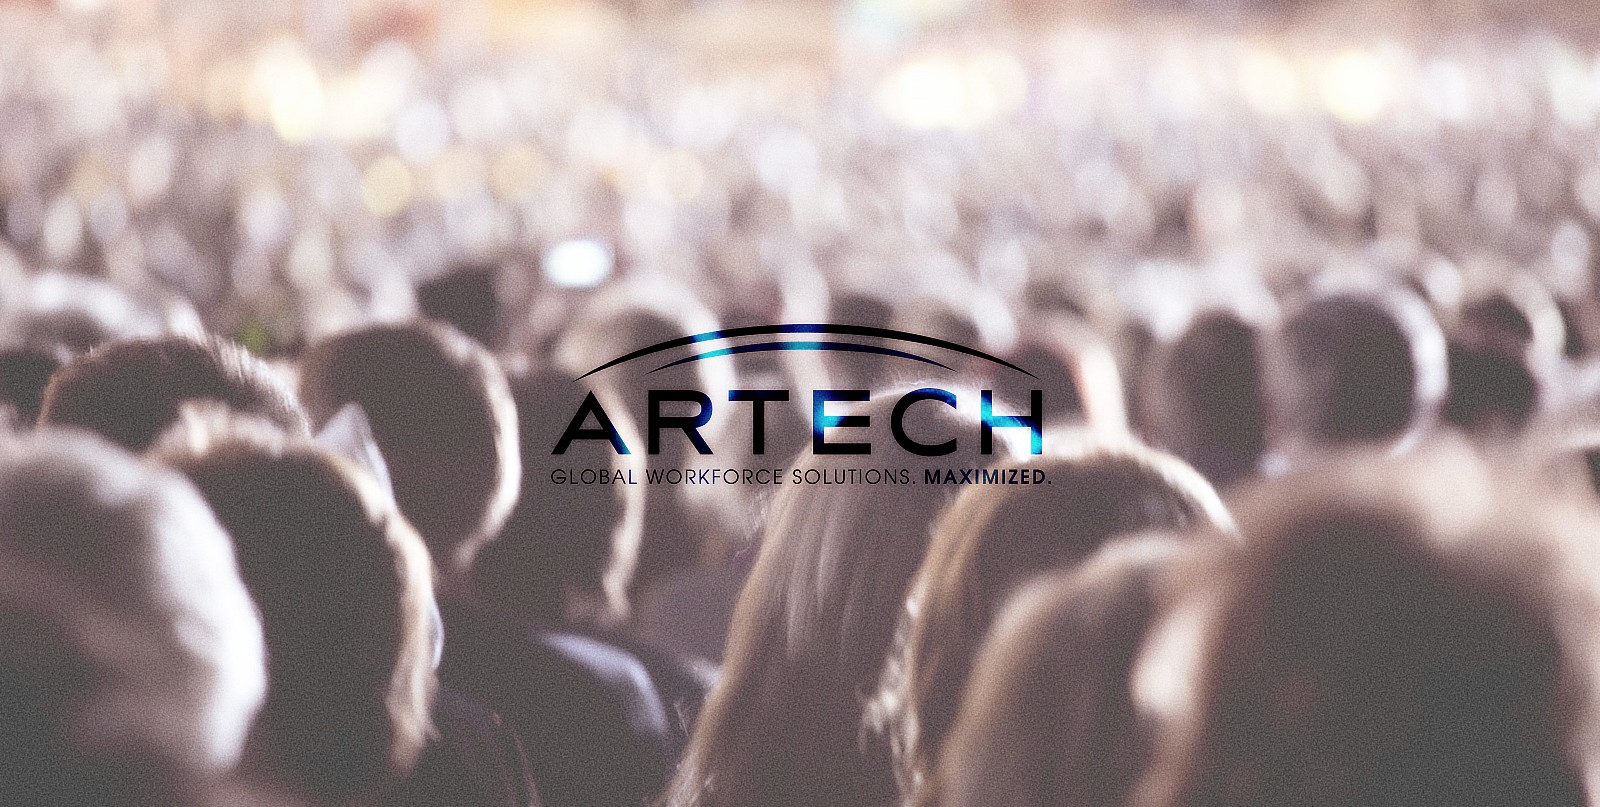 US staffing firm Artech discloses ransomware attack, data breach